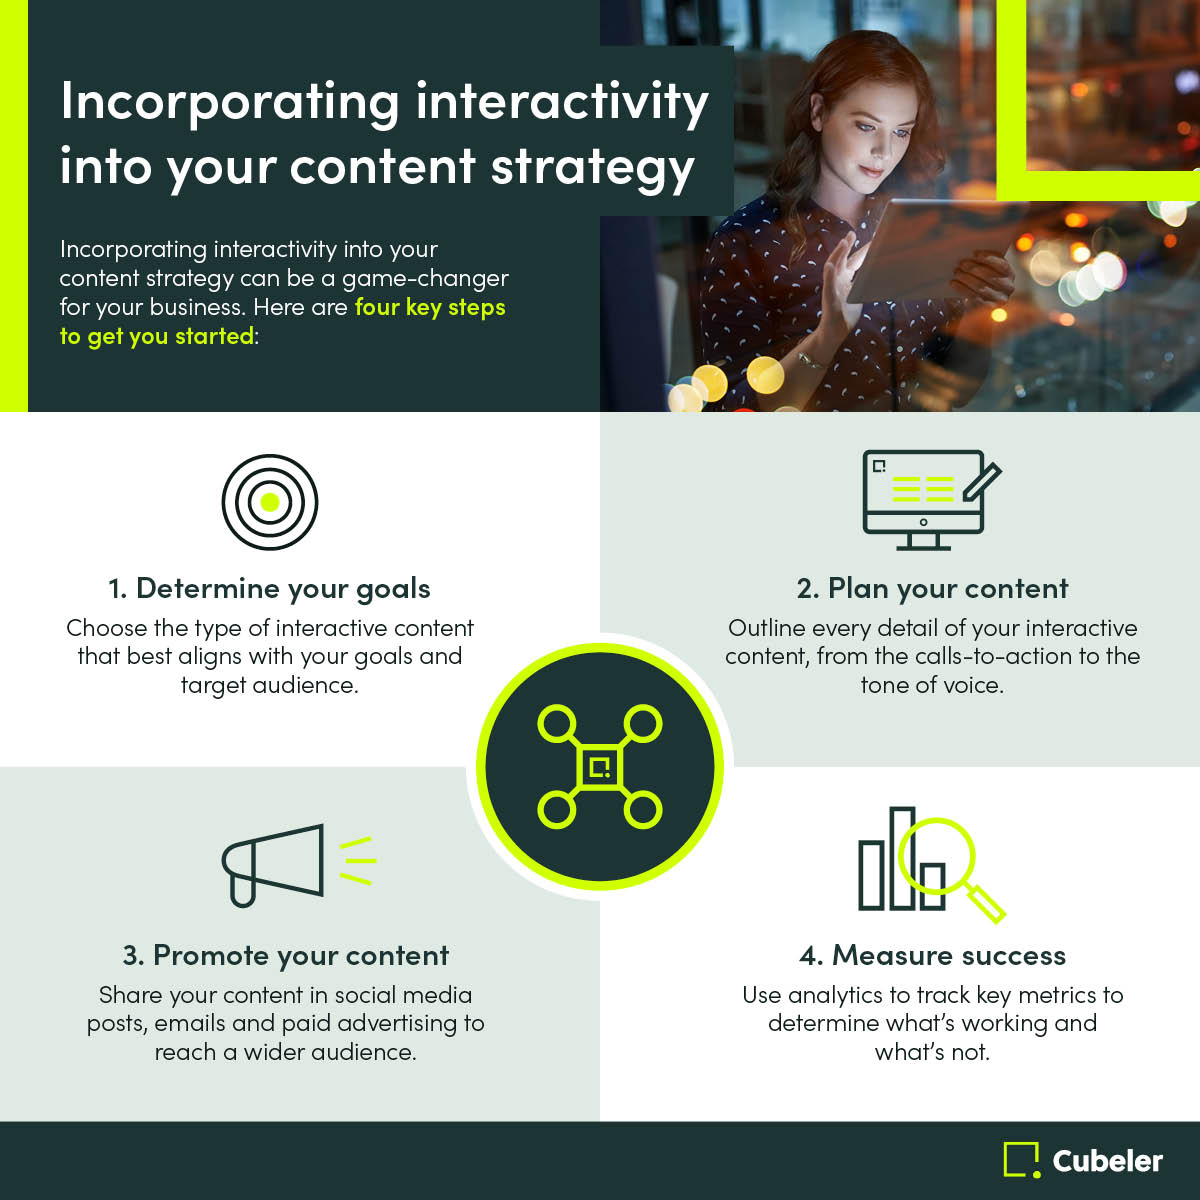 Incorporating interactivity into your content strategy